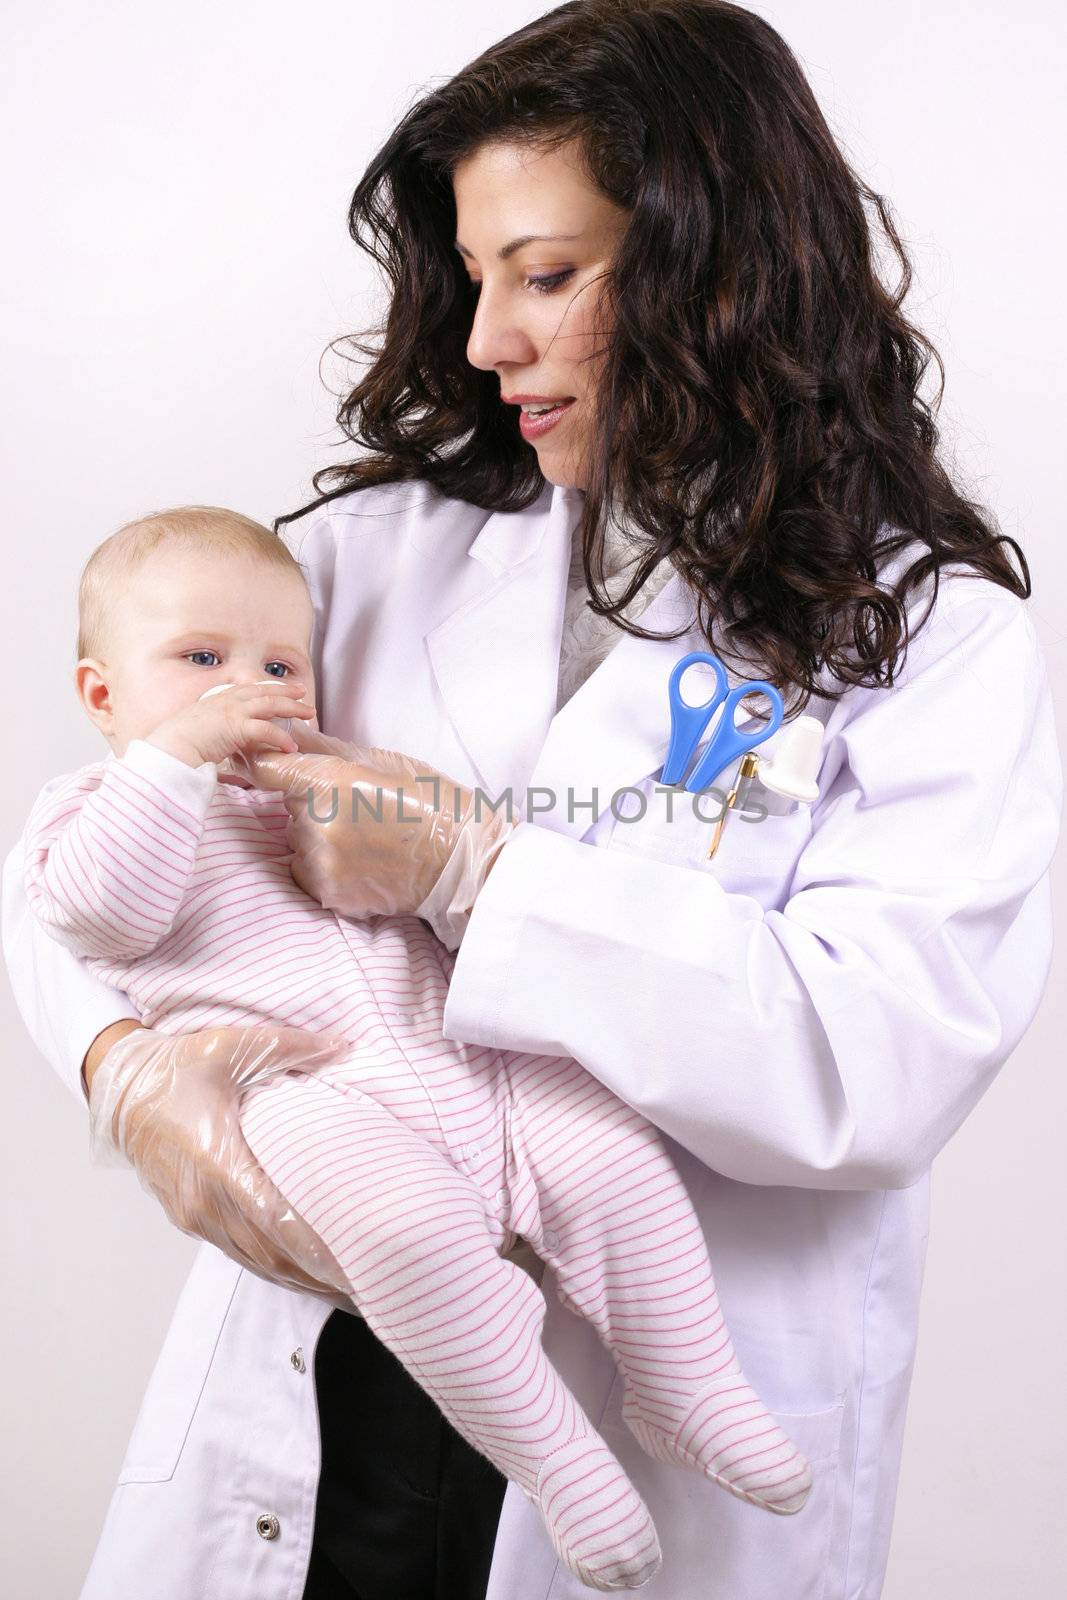 A doctor medicating a baby using a medicator.